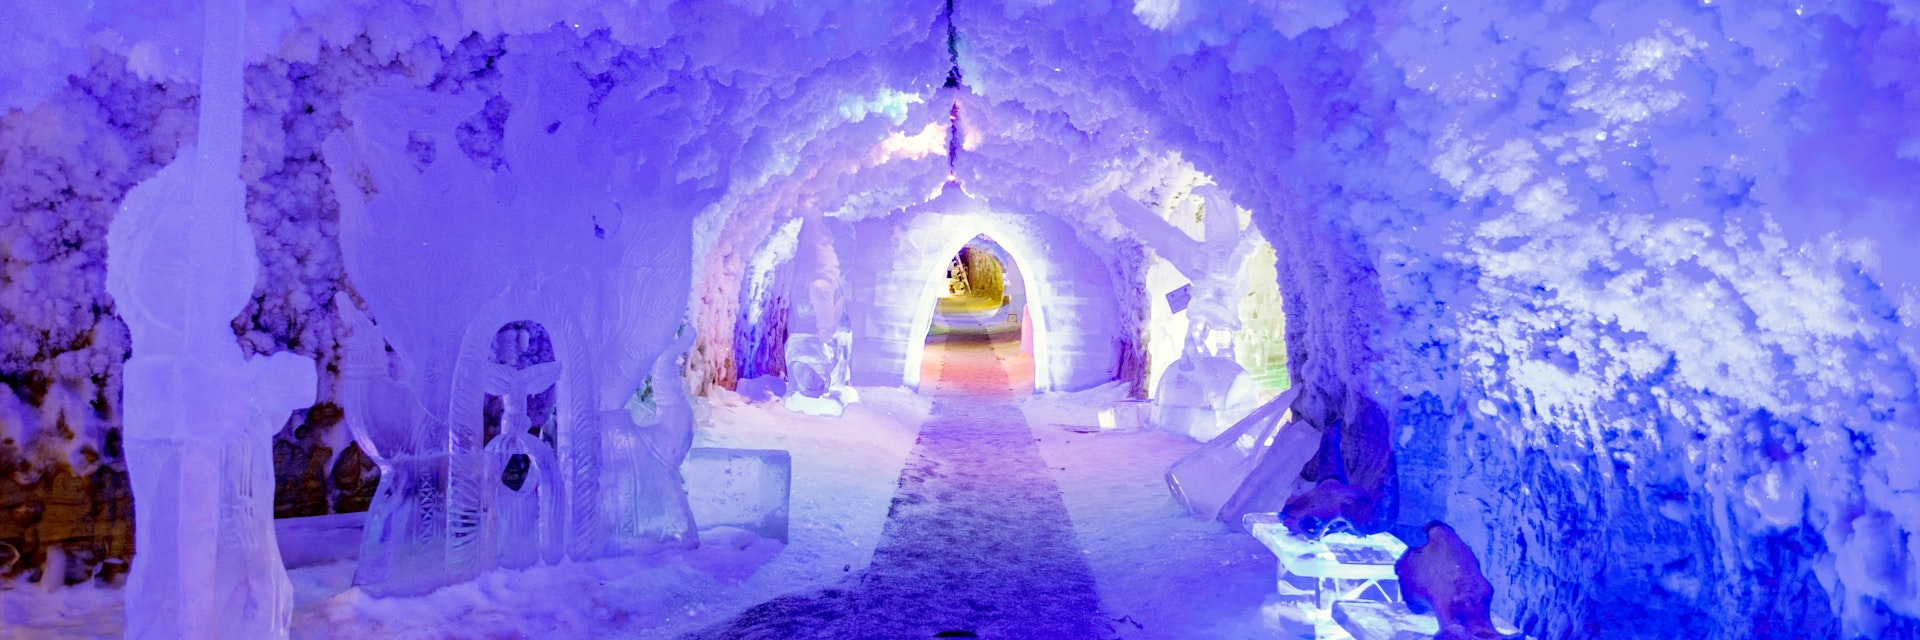 Yakutsk, Russia - CIRCA 2017: The scenery inside Permafrost Kingdom, a tourist attraction in Yakutsk, Sakha Republic, Russia. It is an underground cave with a lot of ice statues and sculptures.